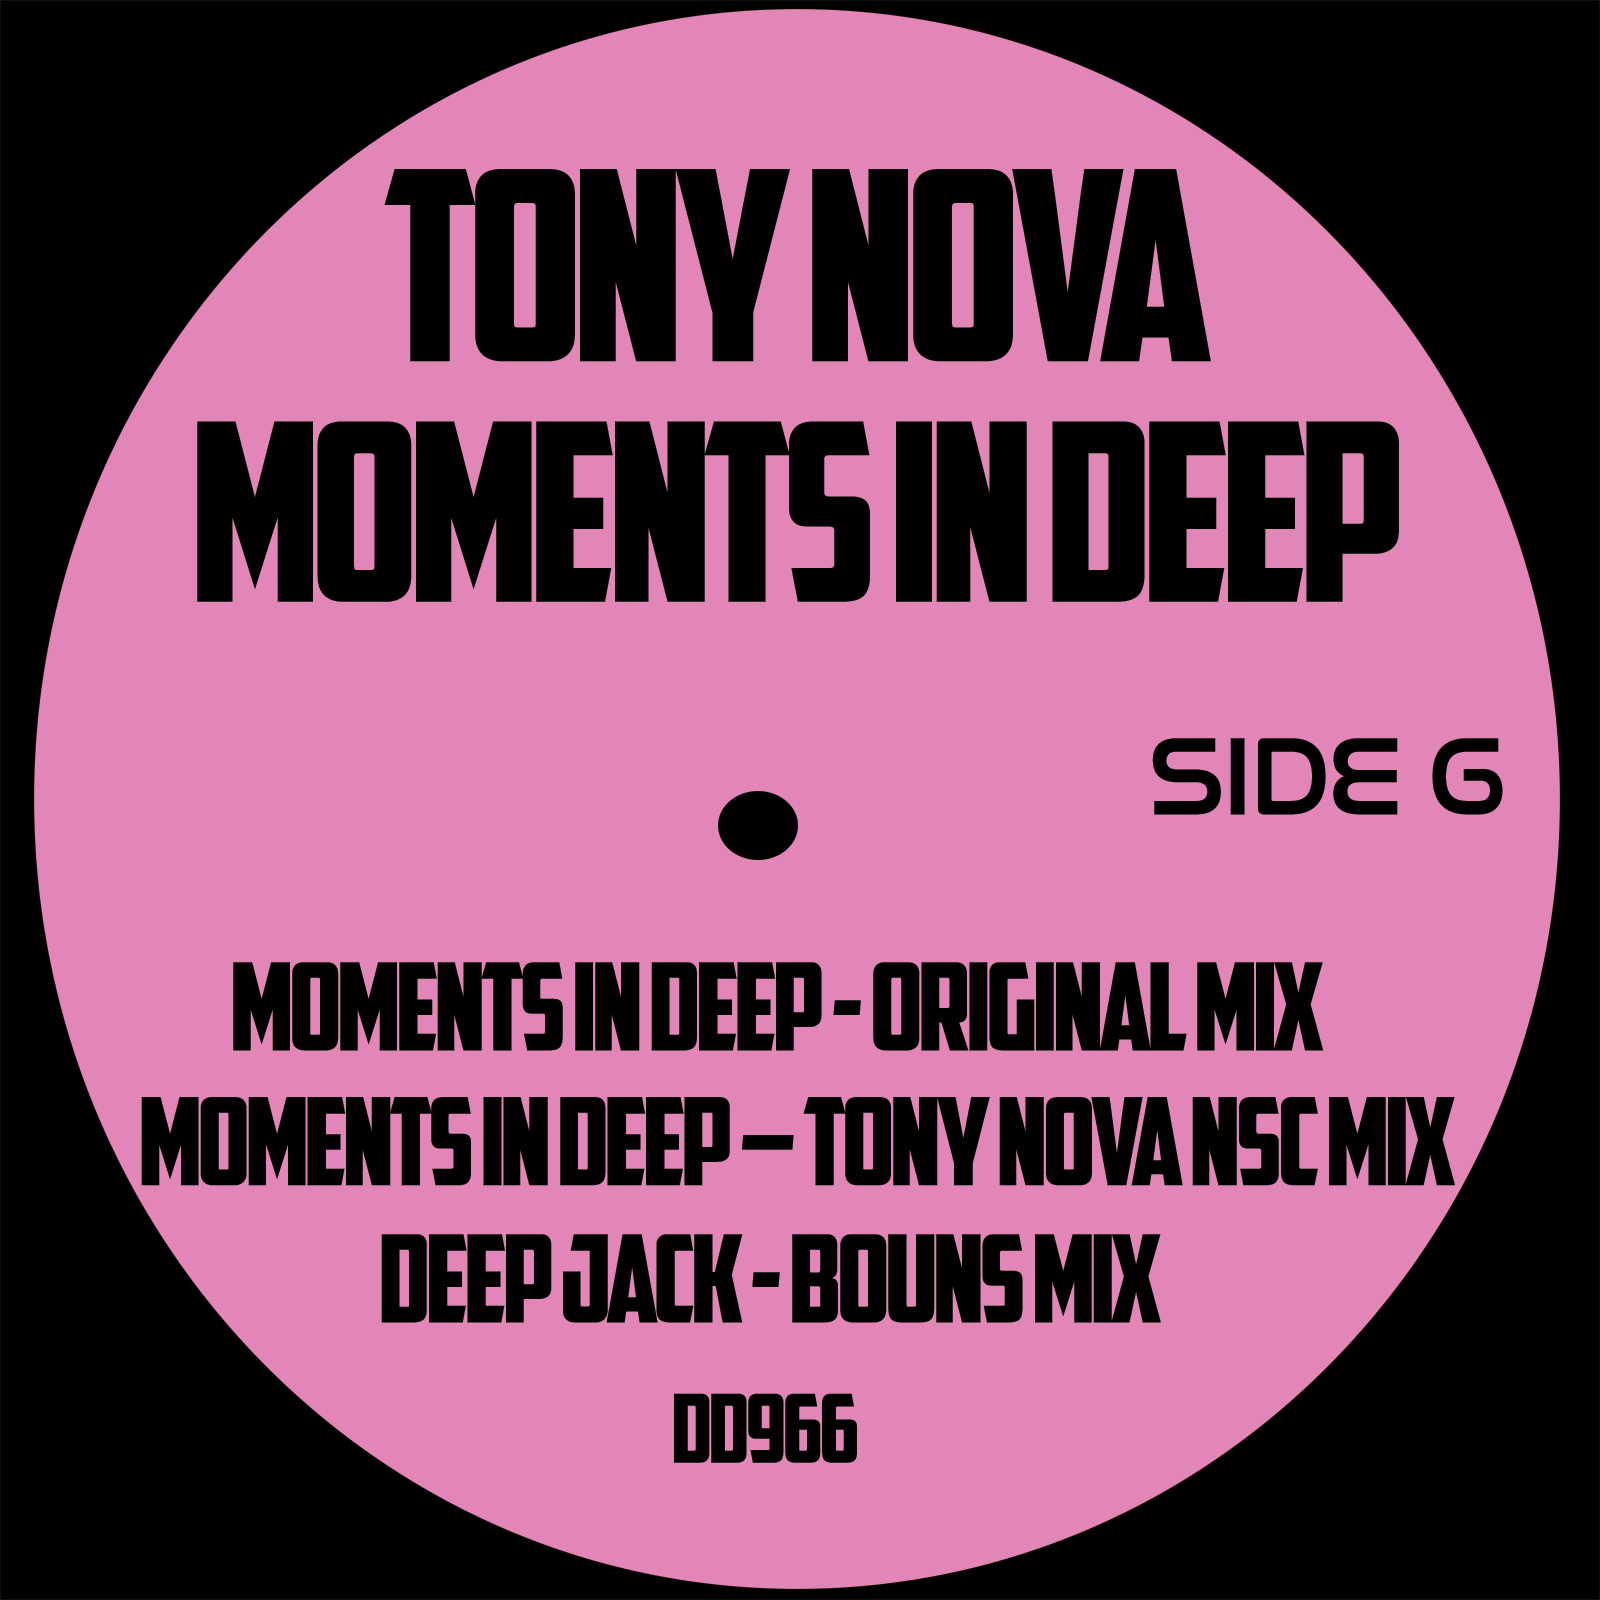 The One and only Tony Nova Bounces back with DD-966 – House house Music & Techno mixes